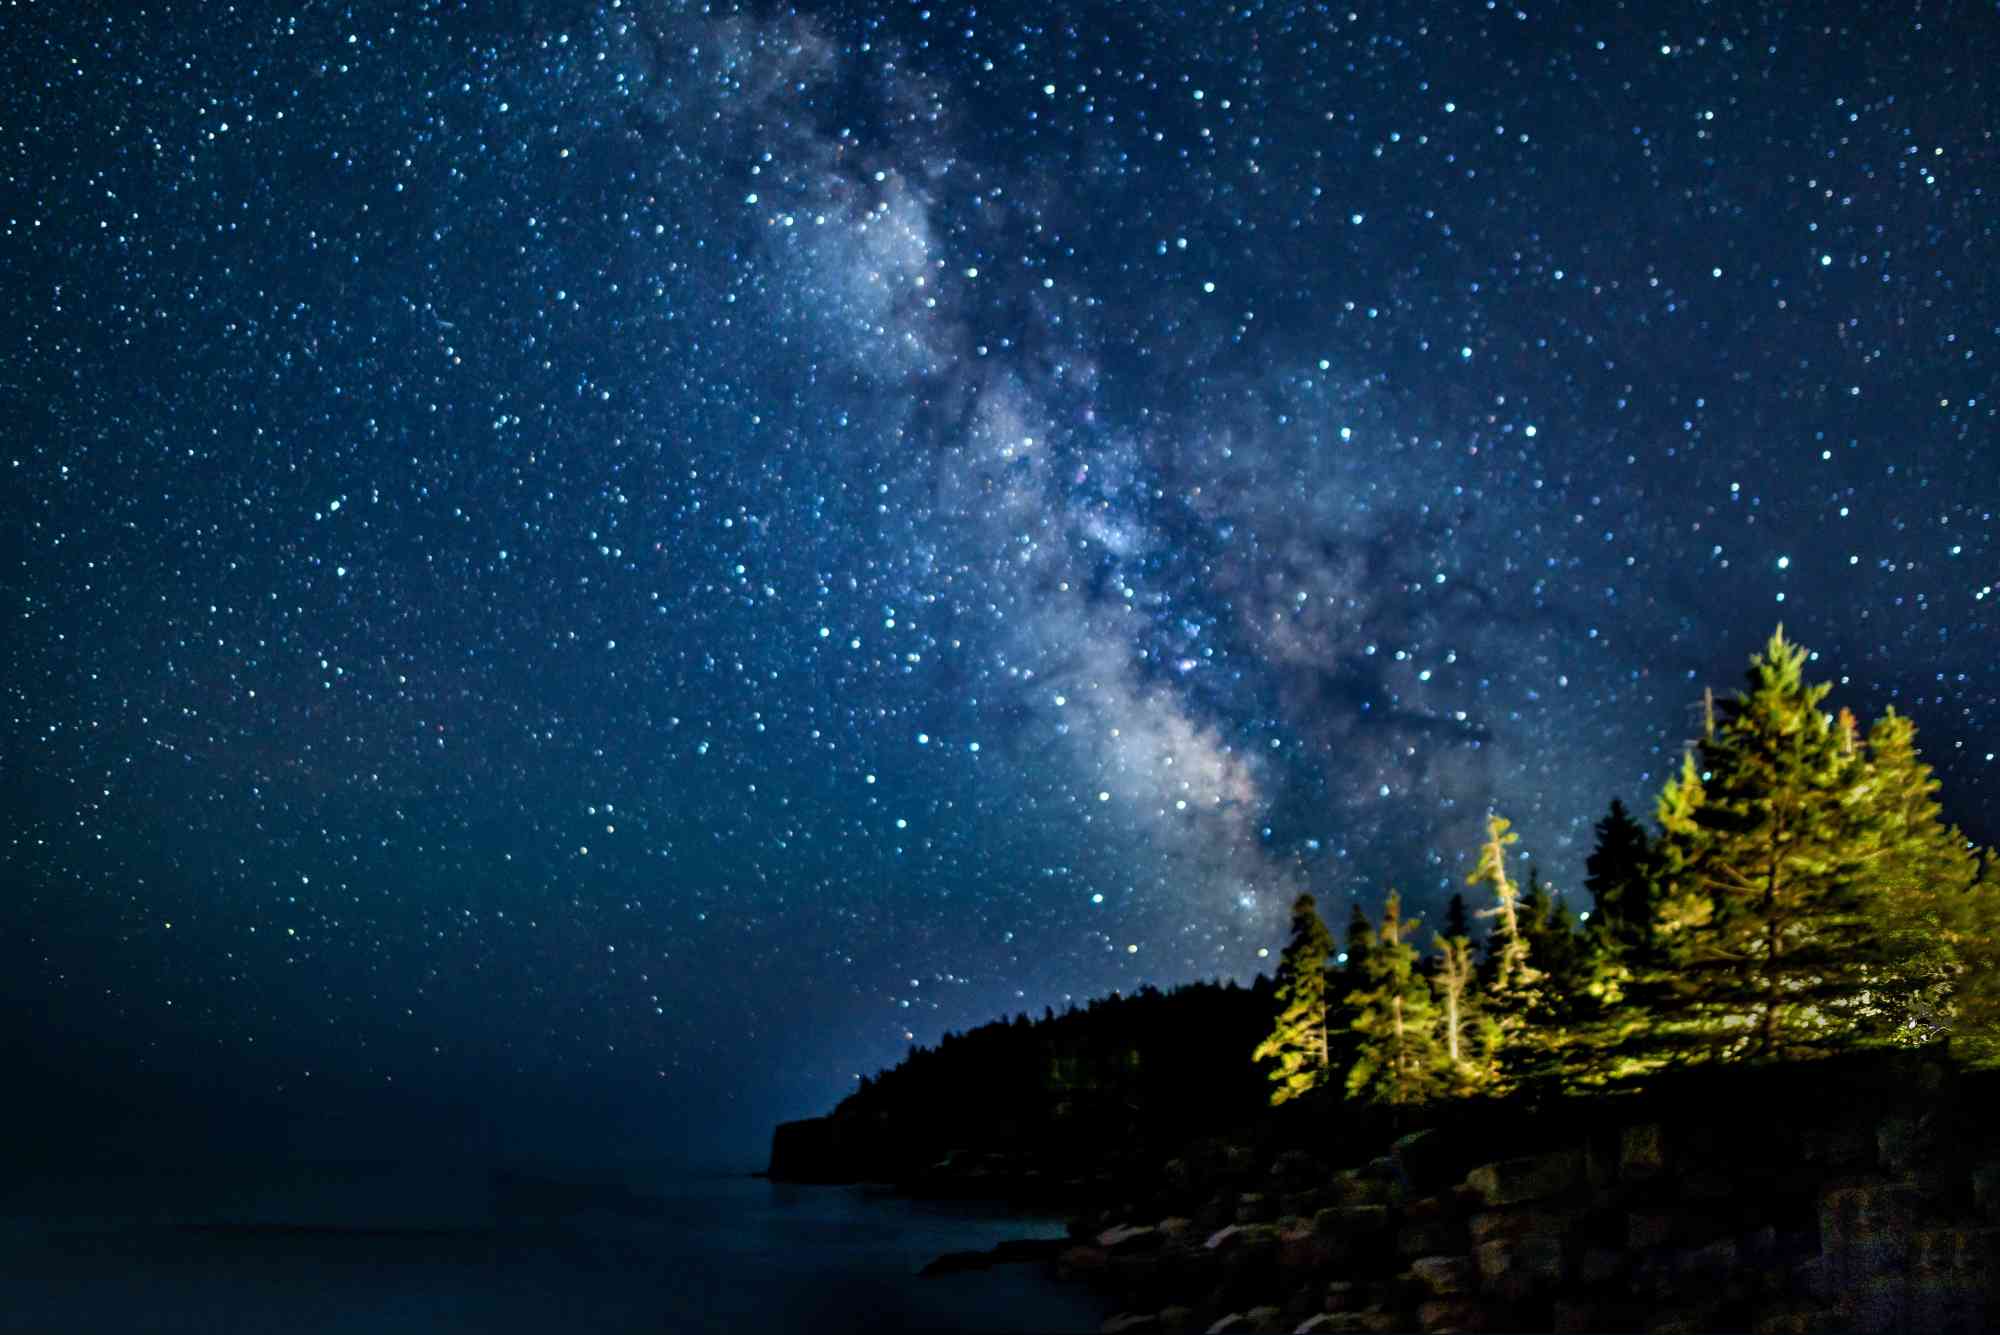 Milky way at Otter Point Acadia National Park, Maine